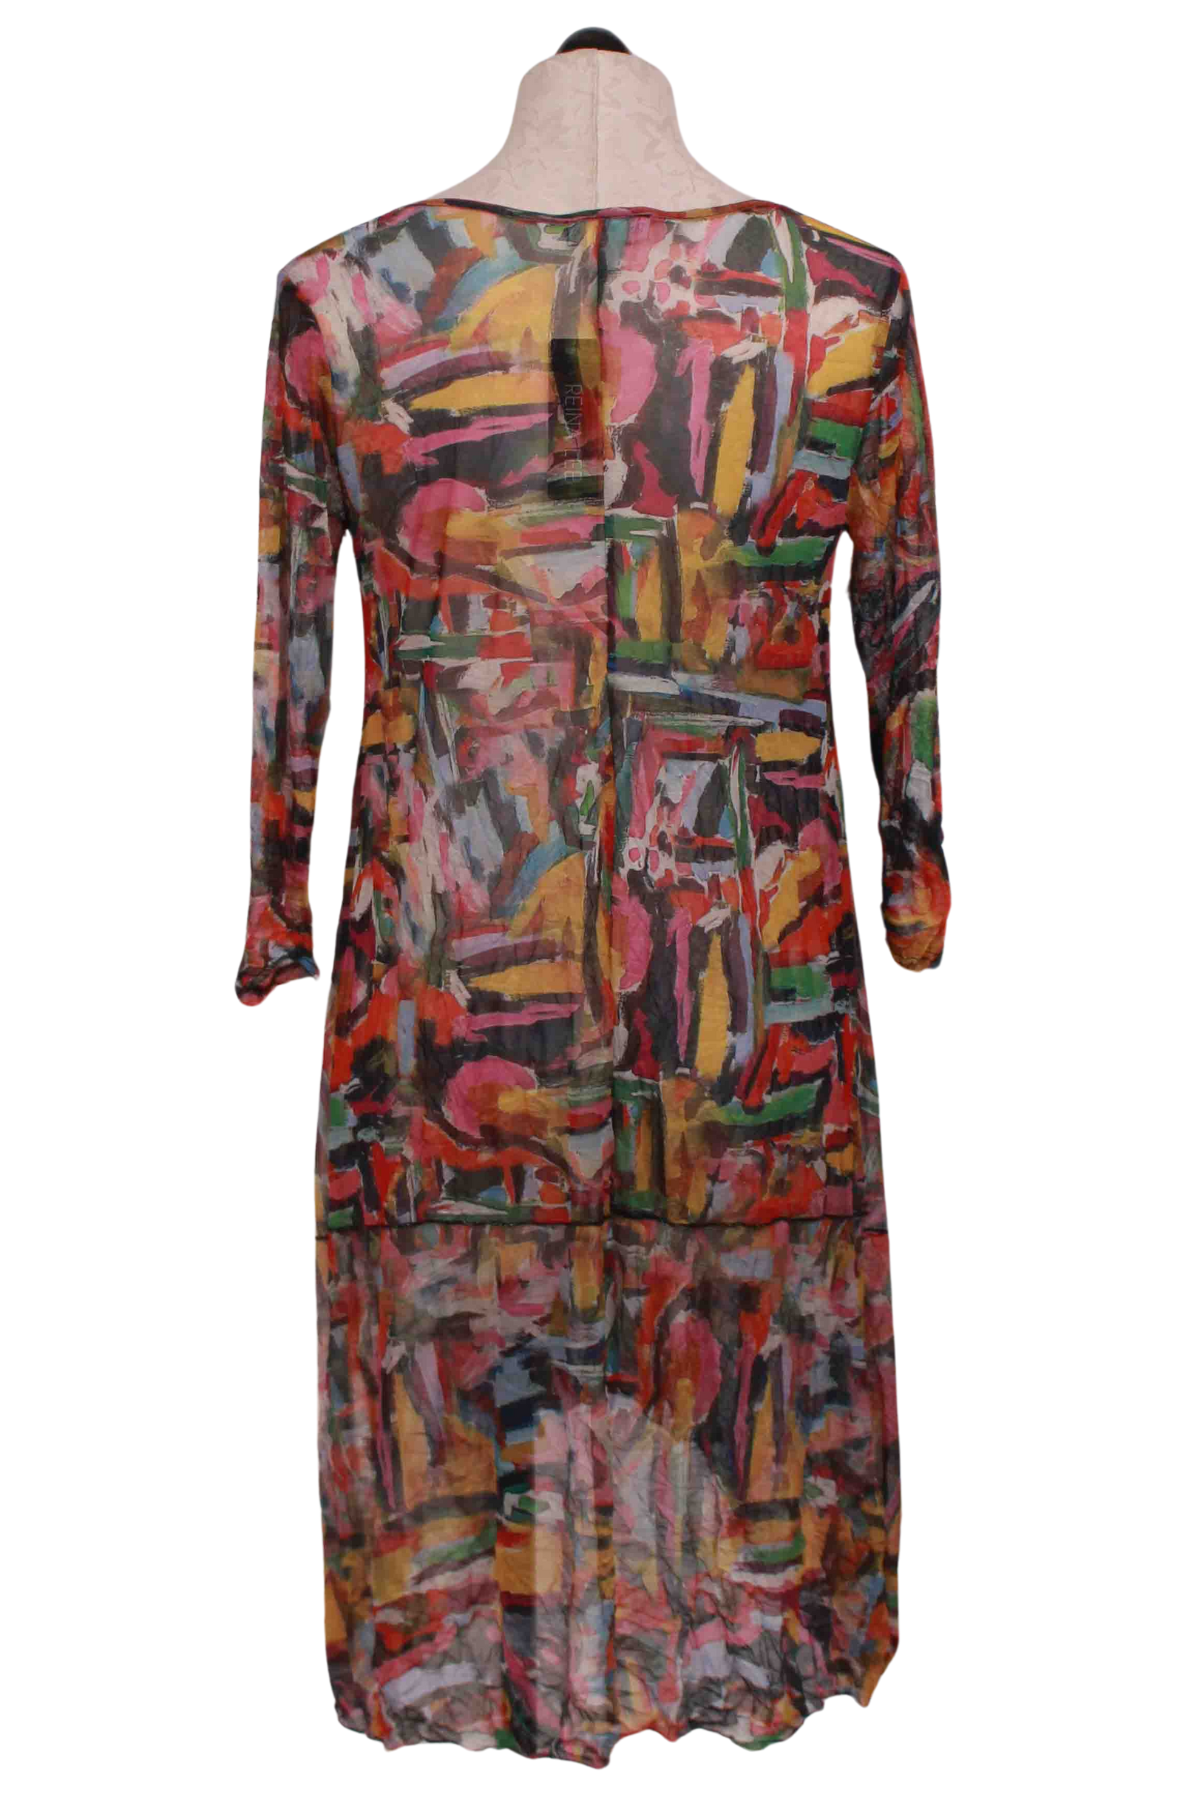 back view of Mesh Abstract Print 3/4 Sleeve Hi Low Dress by Reina Lee